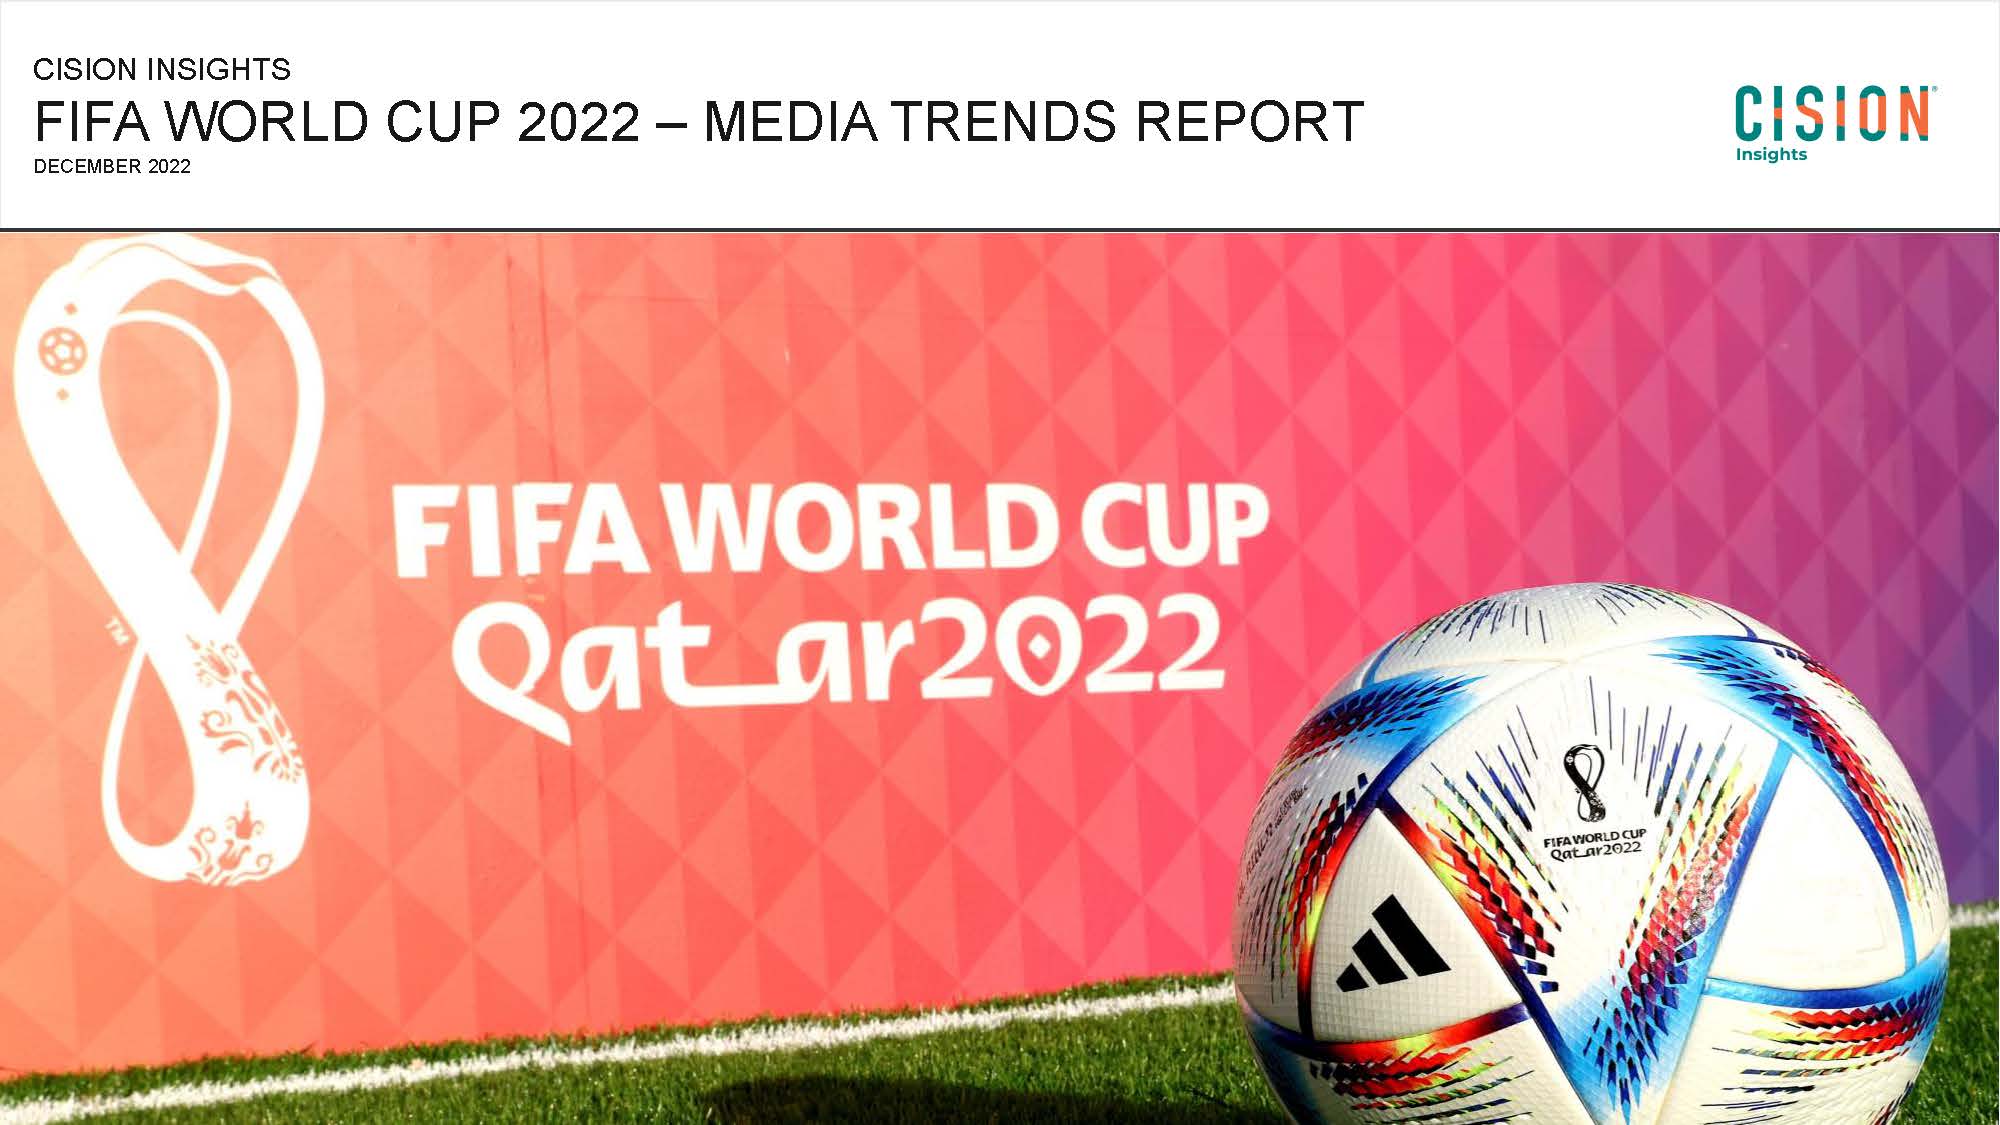 FIFA WORLD CUP Trends Report 2022